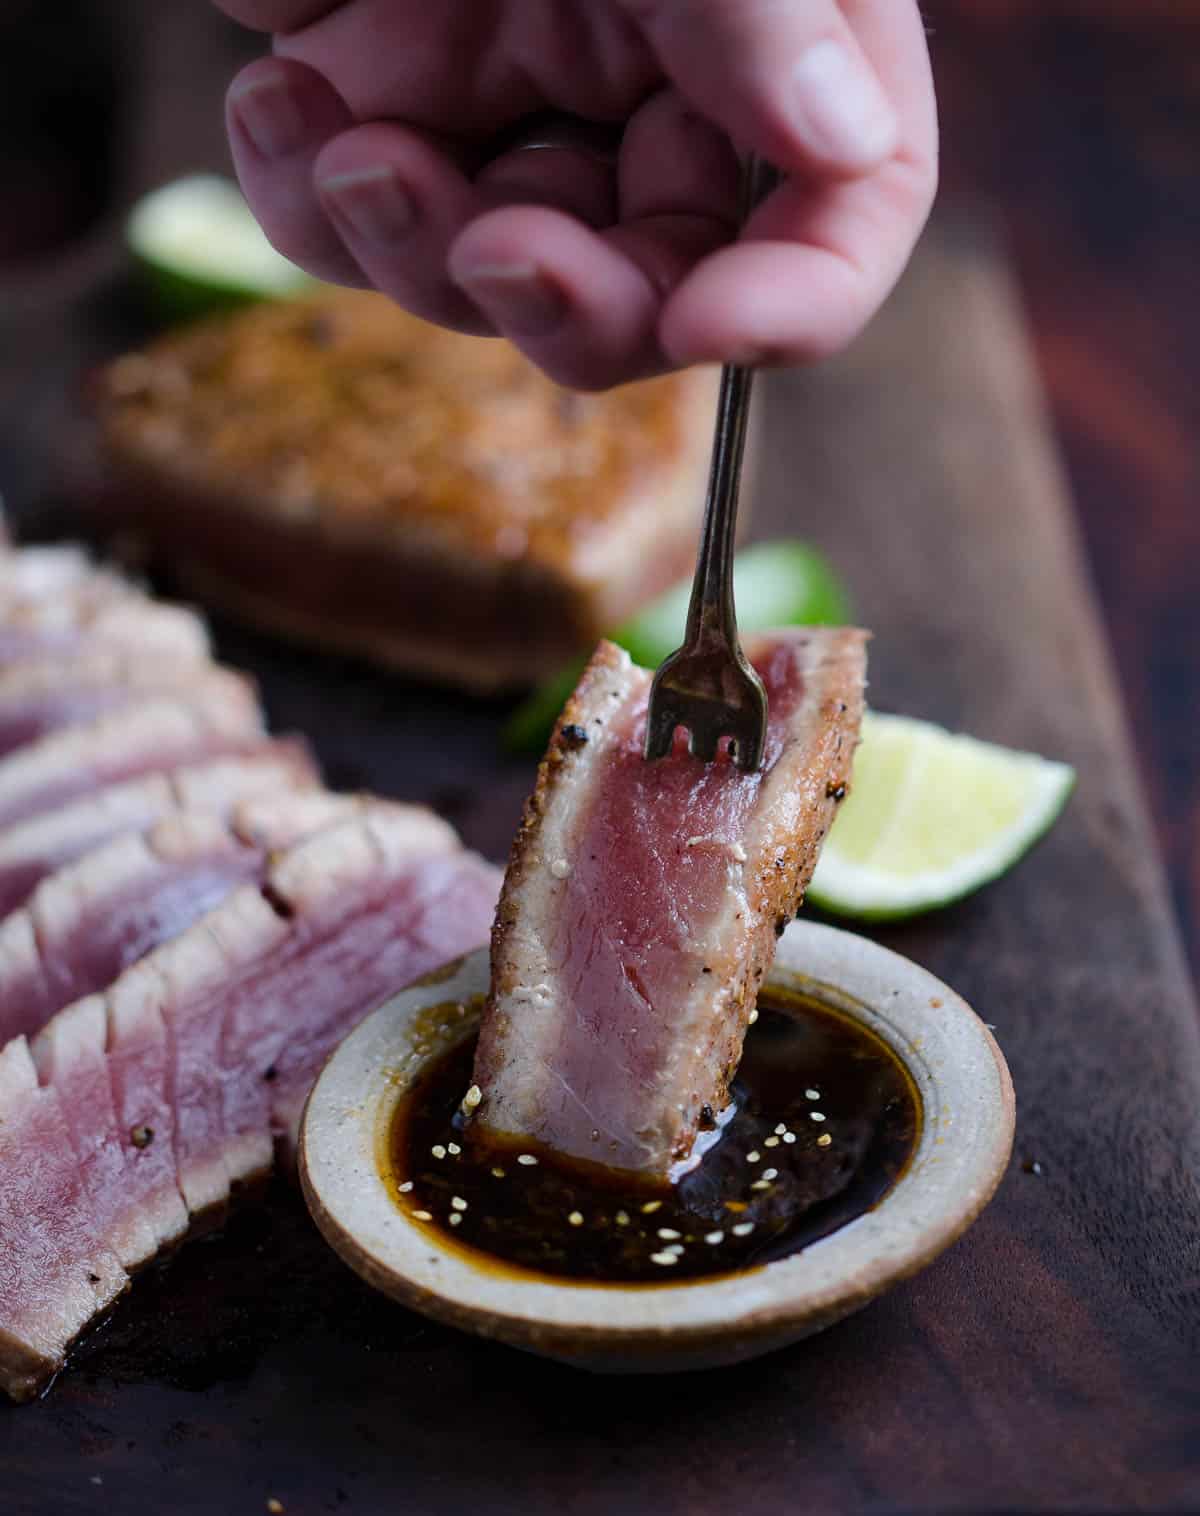 Slice of Ahi Tuna dipping in a soy dipping sauce